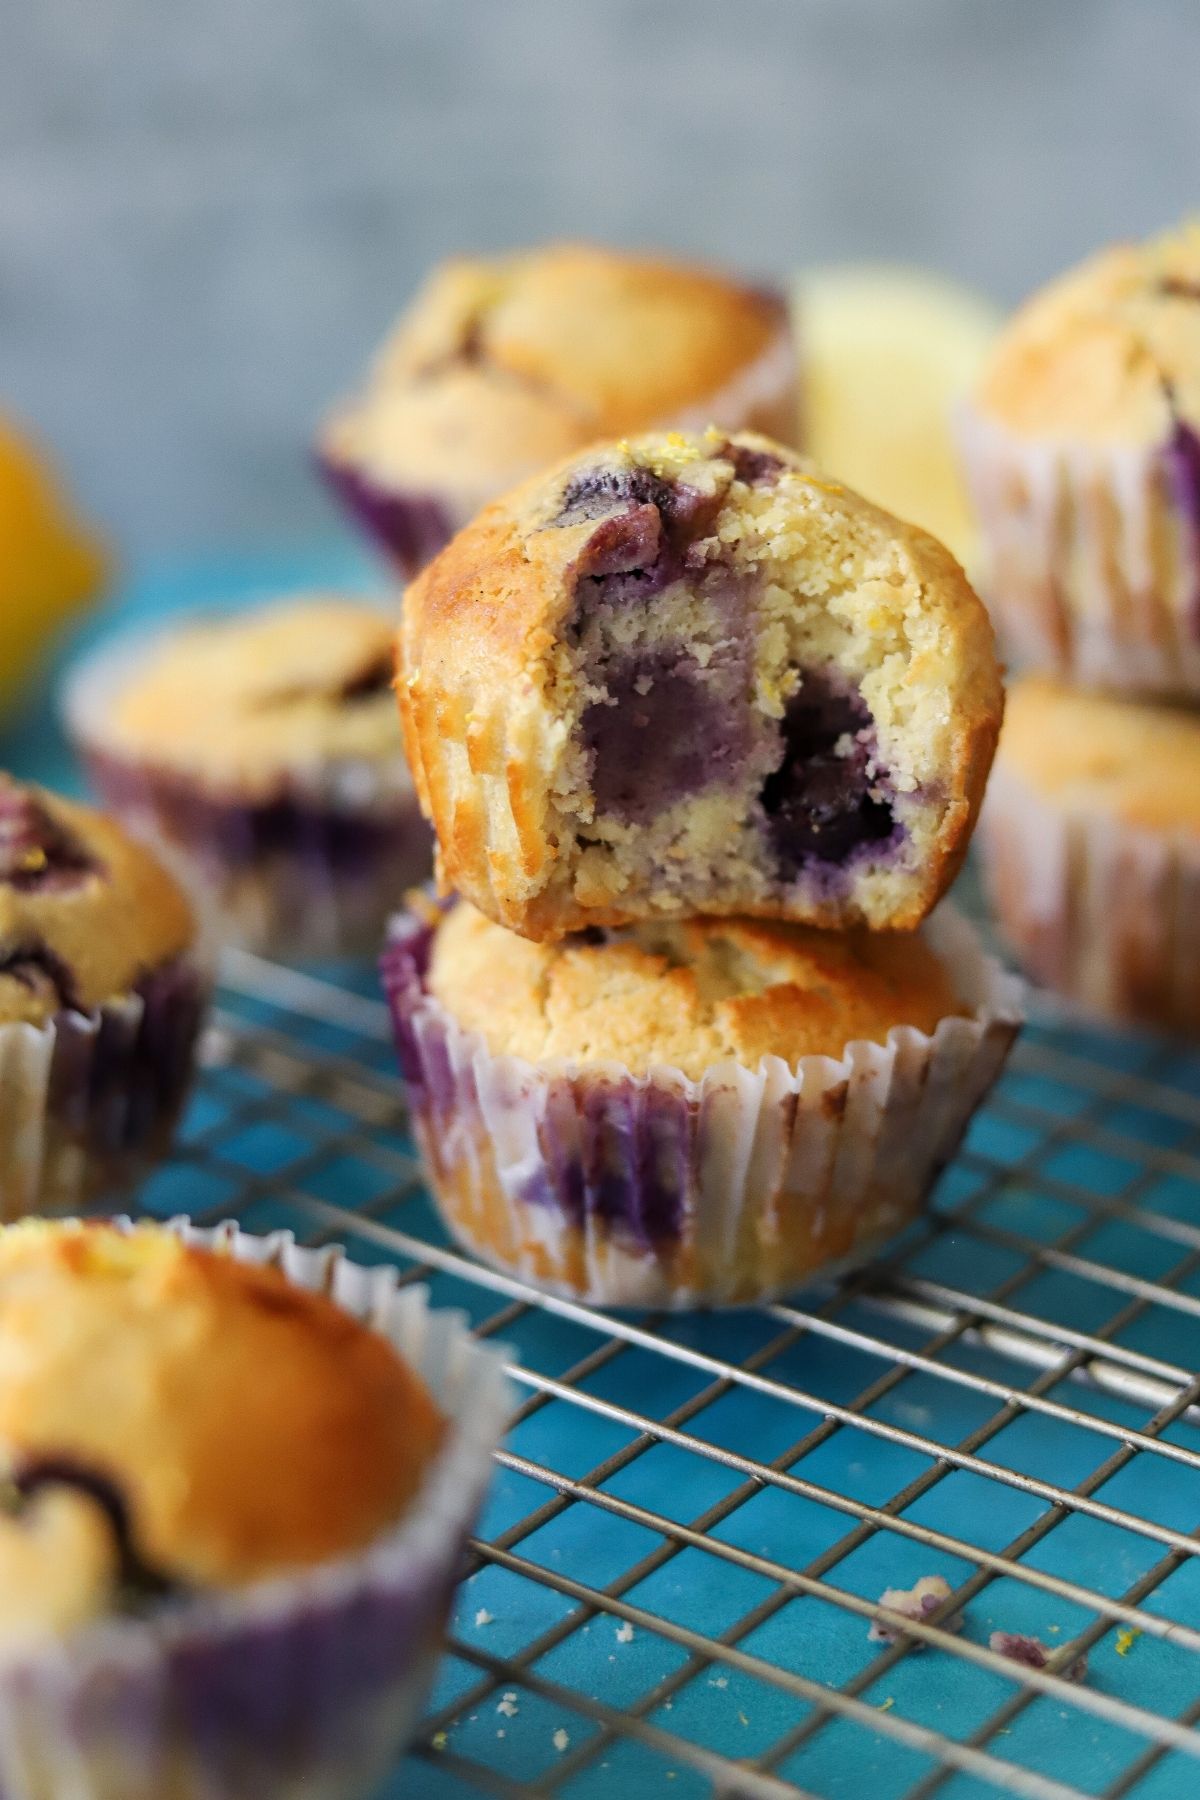 Homemade lemon blueberry muffins sticked up on a cooling rack. The top muffin has one bite missing.